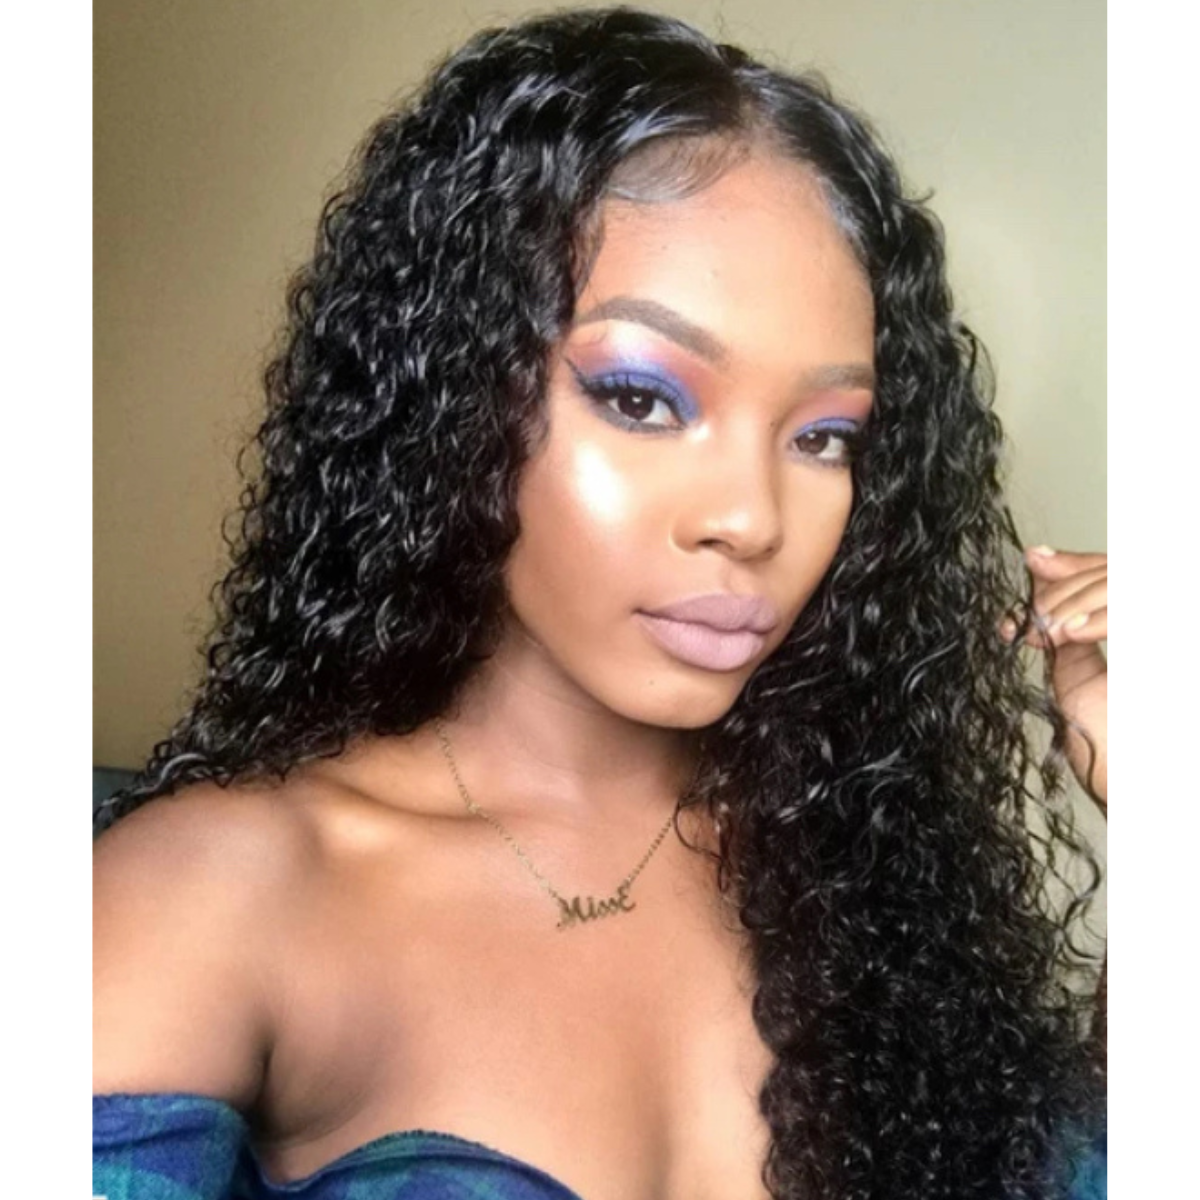 Human Hair 13x4 Full Frontal Lace Wigs 180% Density Loose Curly 20" thru 24"